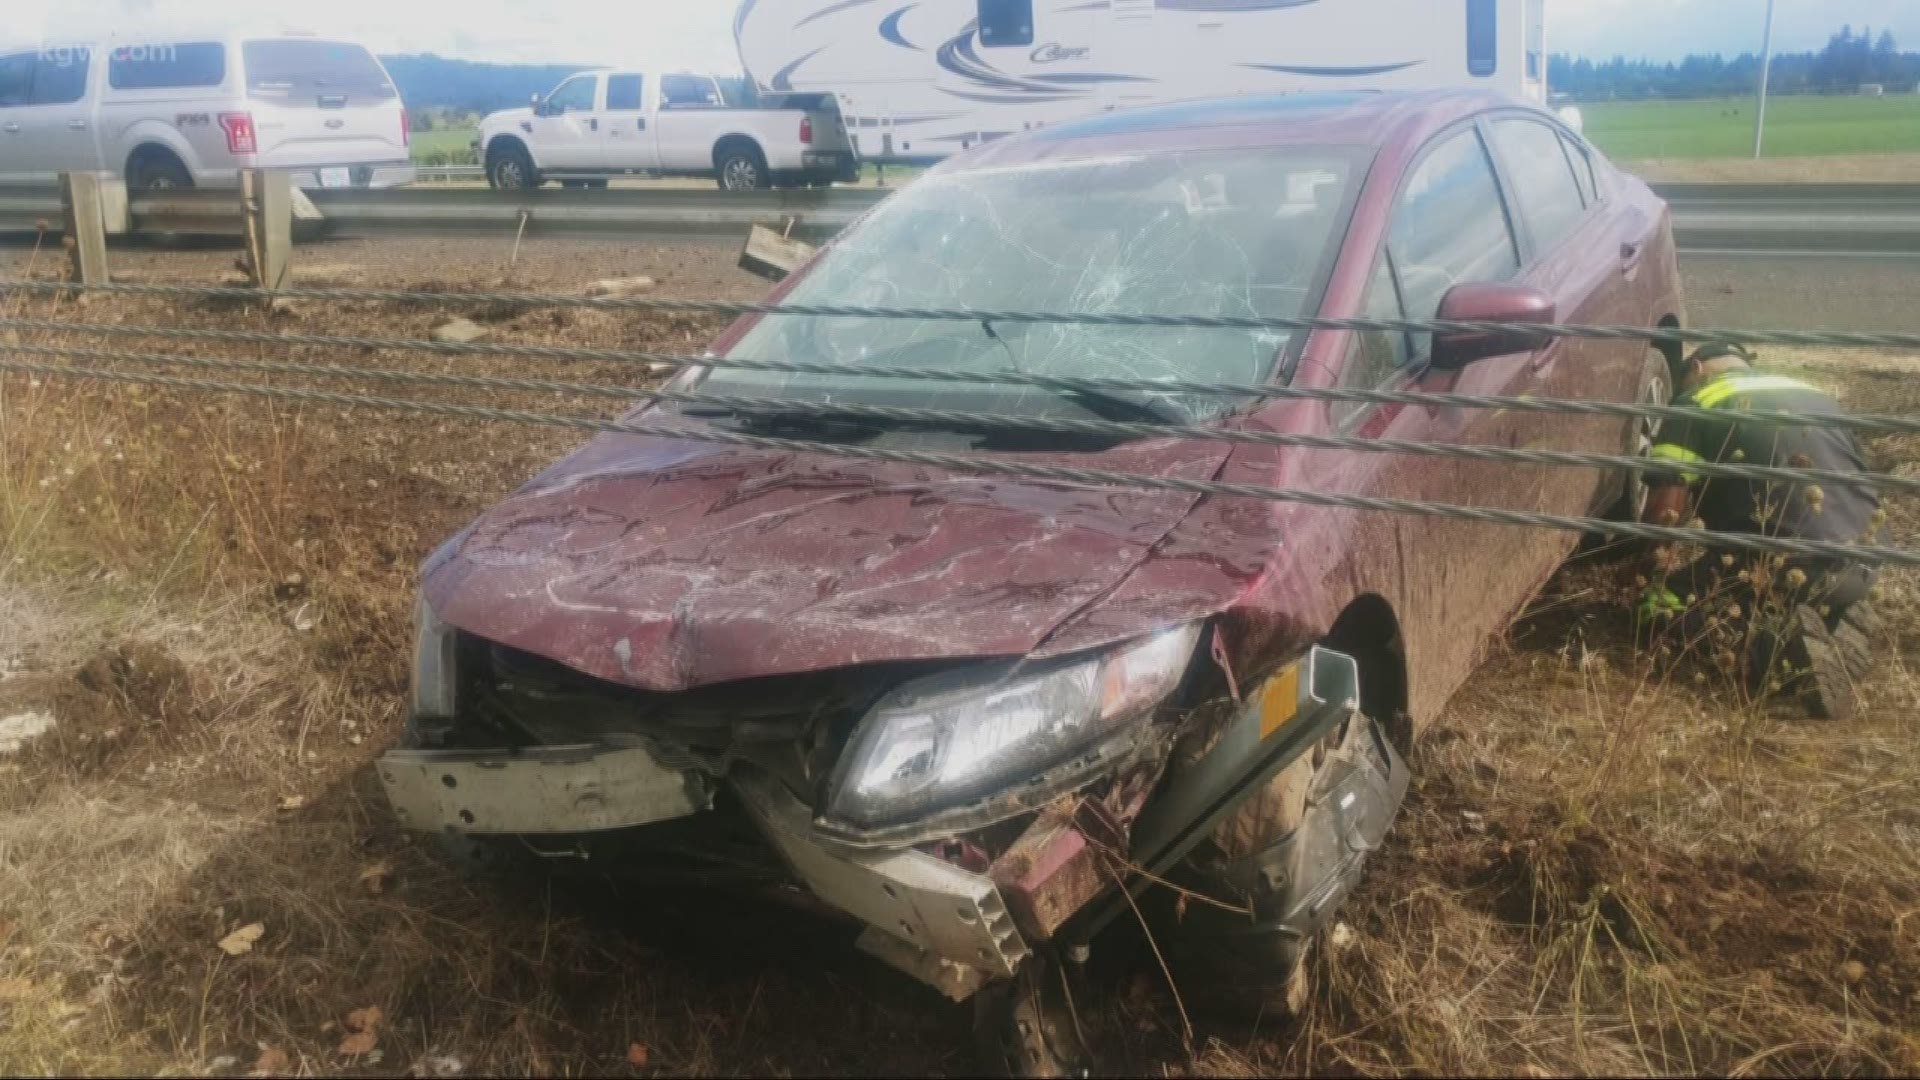 Oregon State University sports broadcaster Mike Parker was returning to Corvallis from Portland when his car spun out on southbound Interstate 5 near Jefferson.